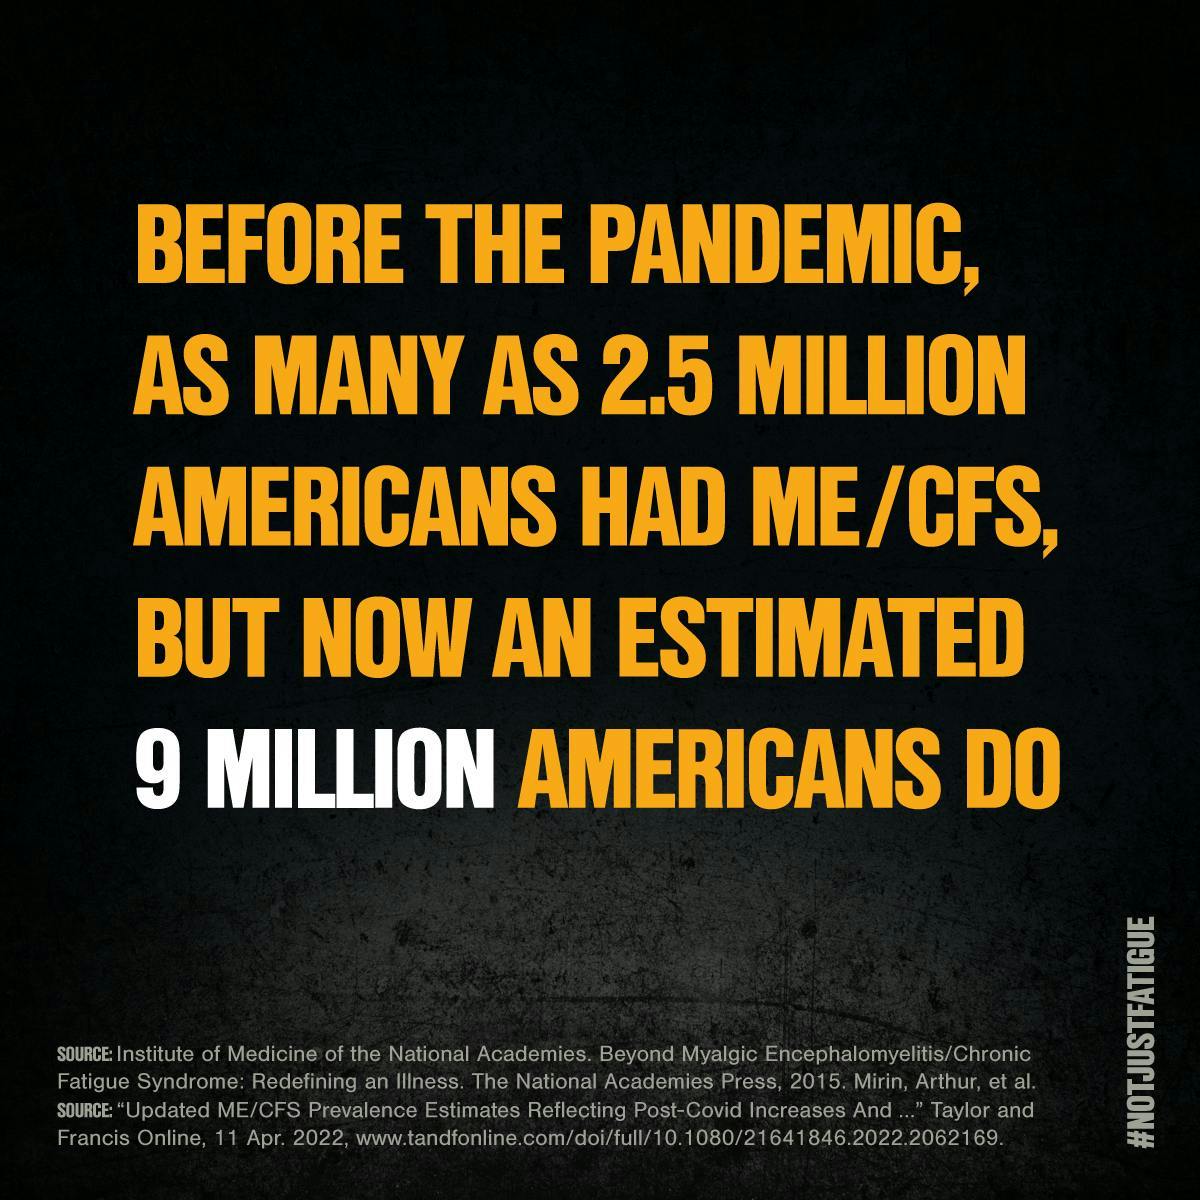 Before the pandemic, as many as 2.5 million americans had ME/CFS, but now an estimated 9 million Americans do